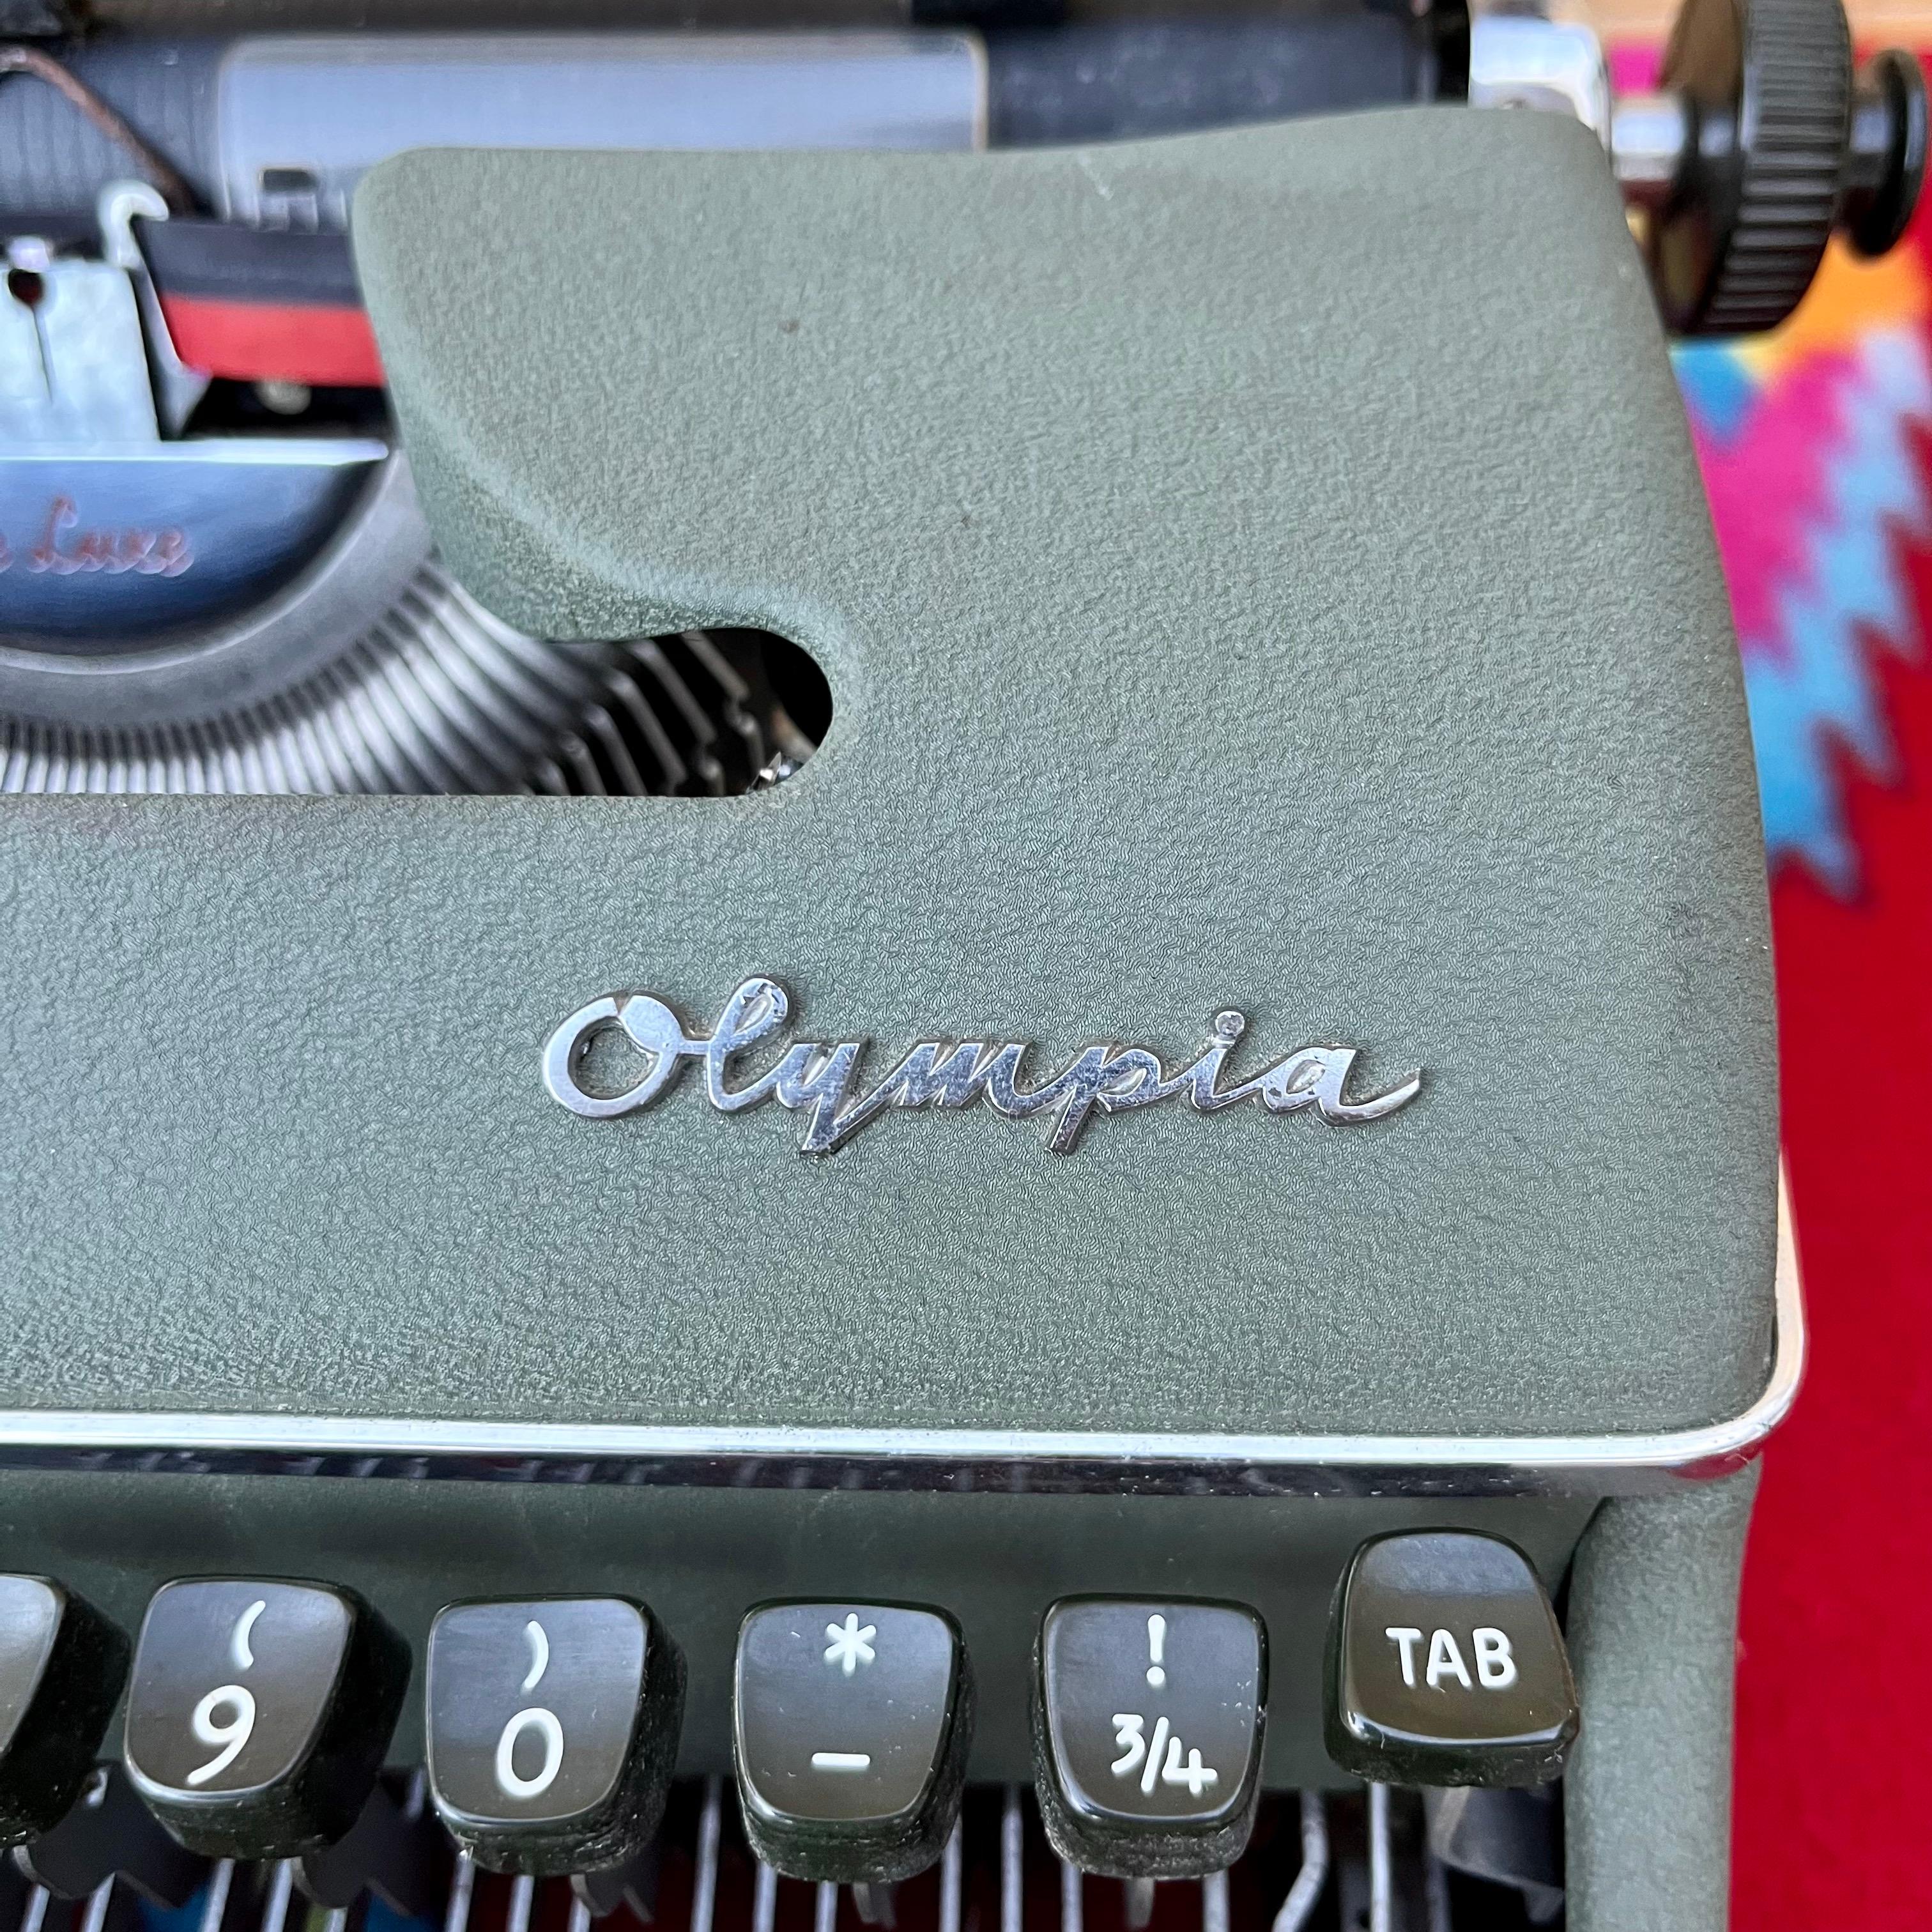 1950s Mid-Century Modern Olympia Sm-3 Portable Typewriter with Case For Sale 6